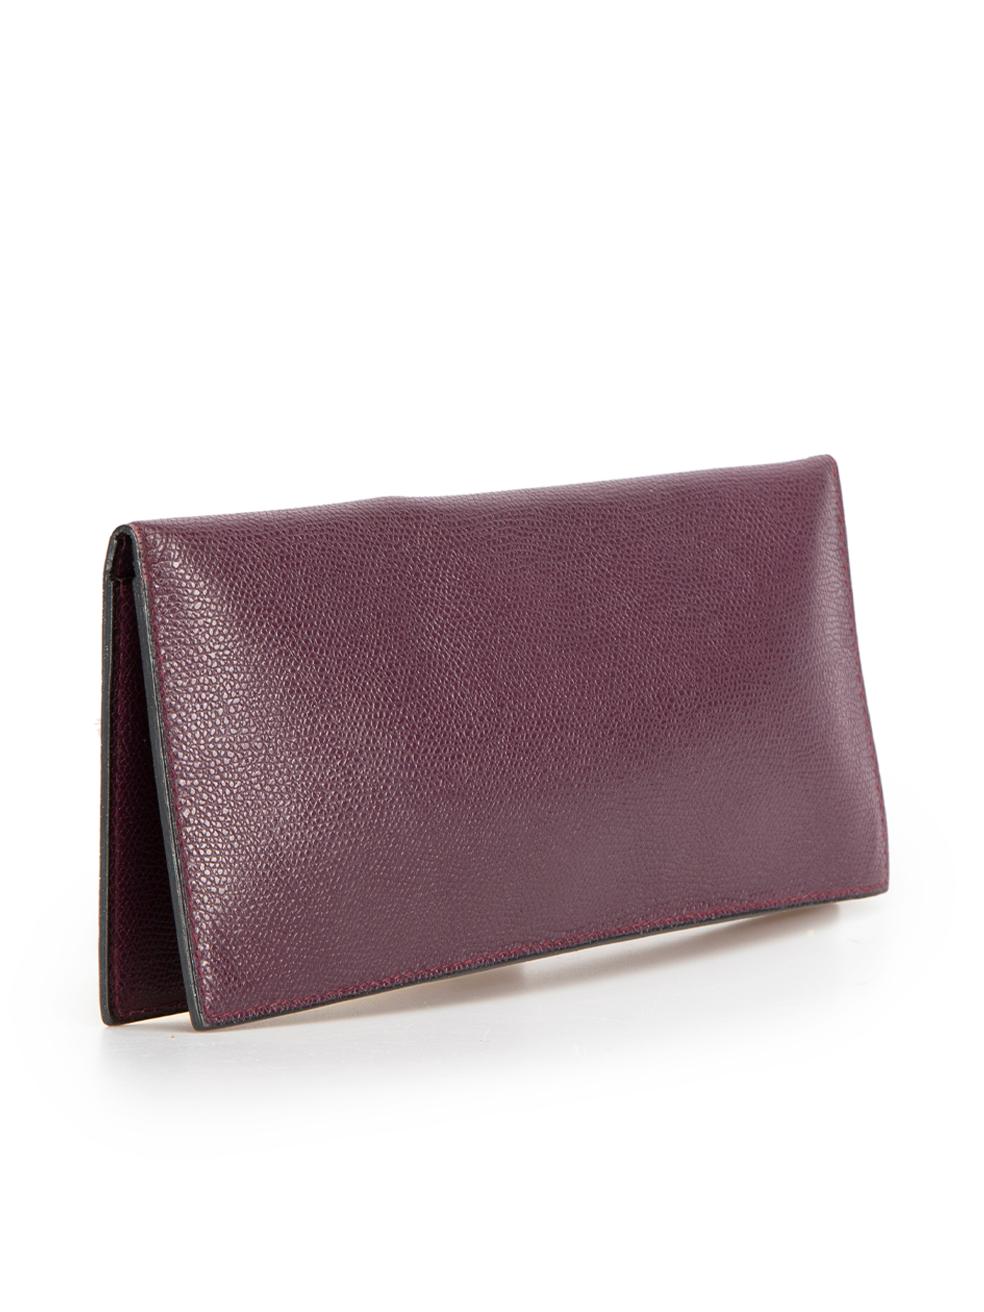 CONDITION is Very good. Hardly any visible wear to wallet is evident on this used Valextra designer resale item.



Details


Purple

Leather

Travel wallet

Passport holder

Card holders

2x Pockets

1x Slip